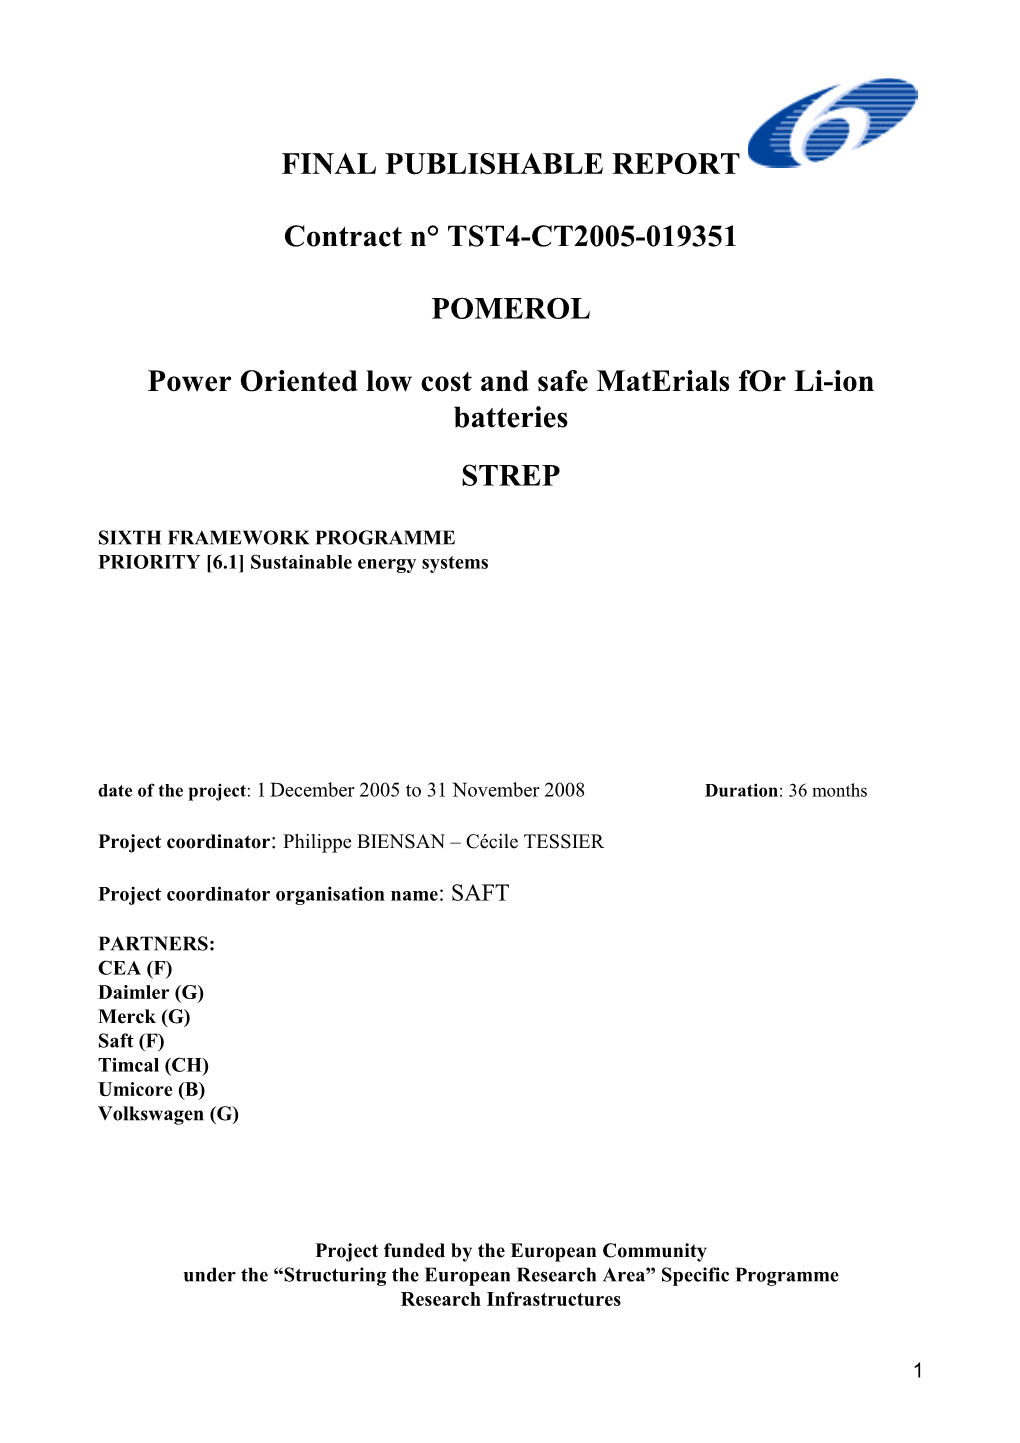 FINAL PUBLISHABLE REPORT Contract N° TST4-CT2005-019351 POMEROL Power Oriented Low Cost and Safe Materials for Li-Ion Batterie